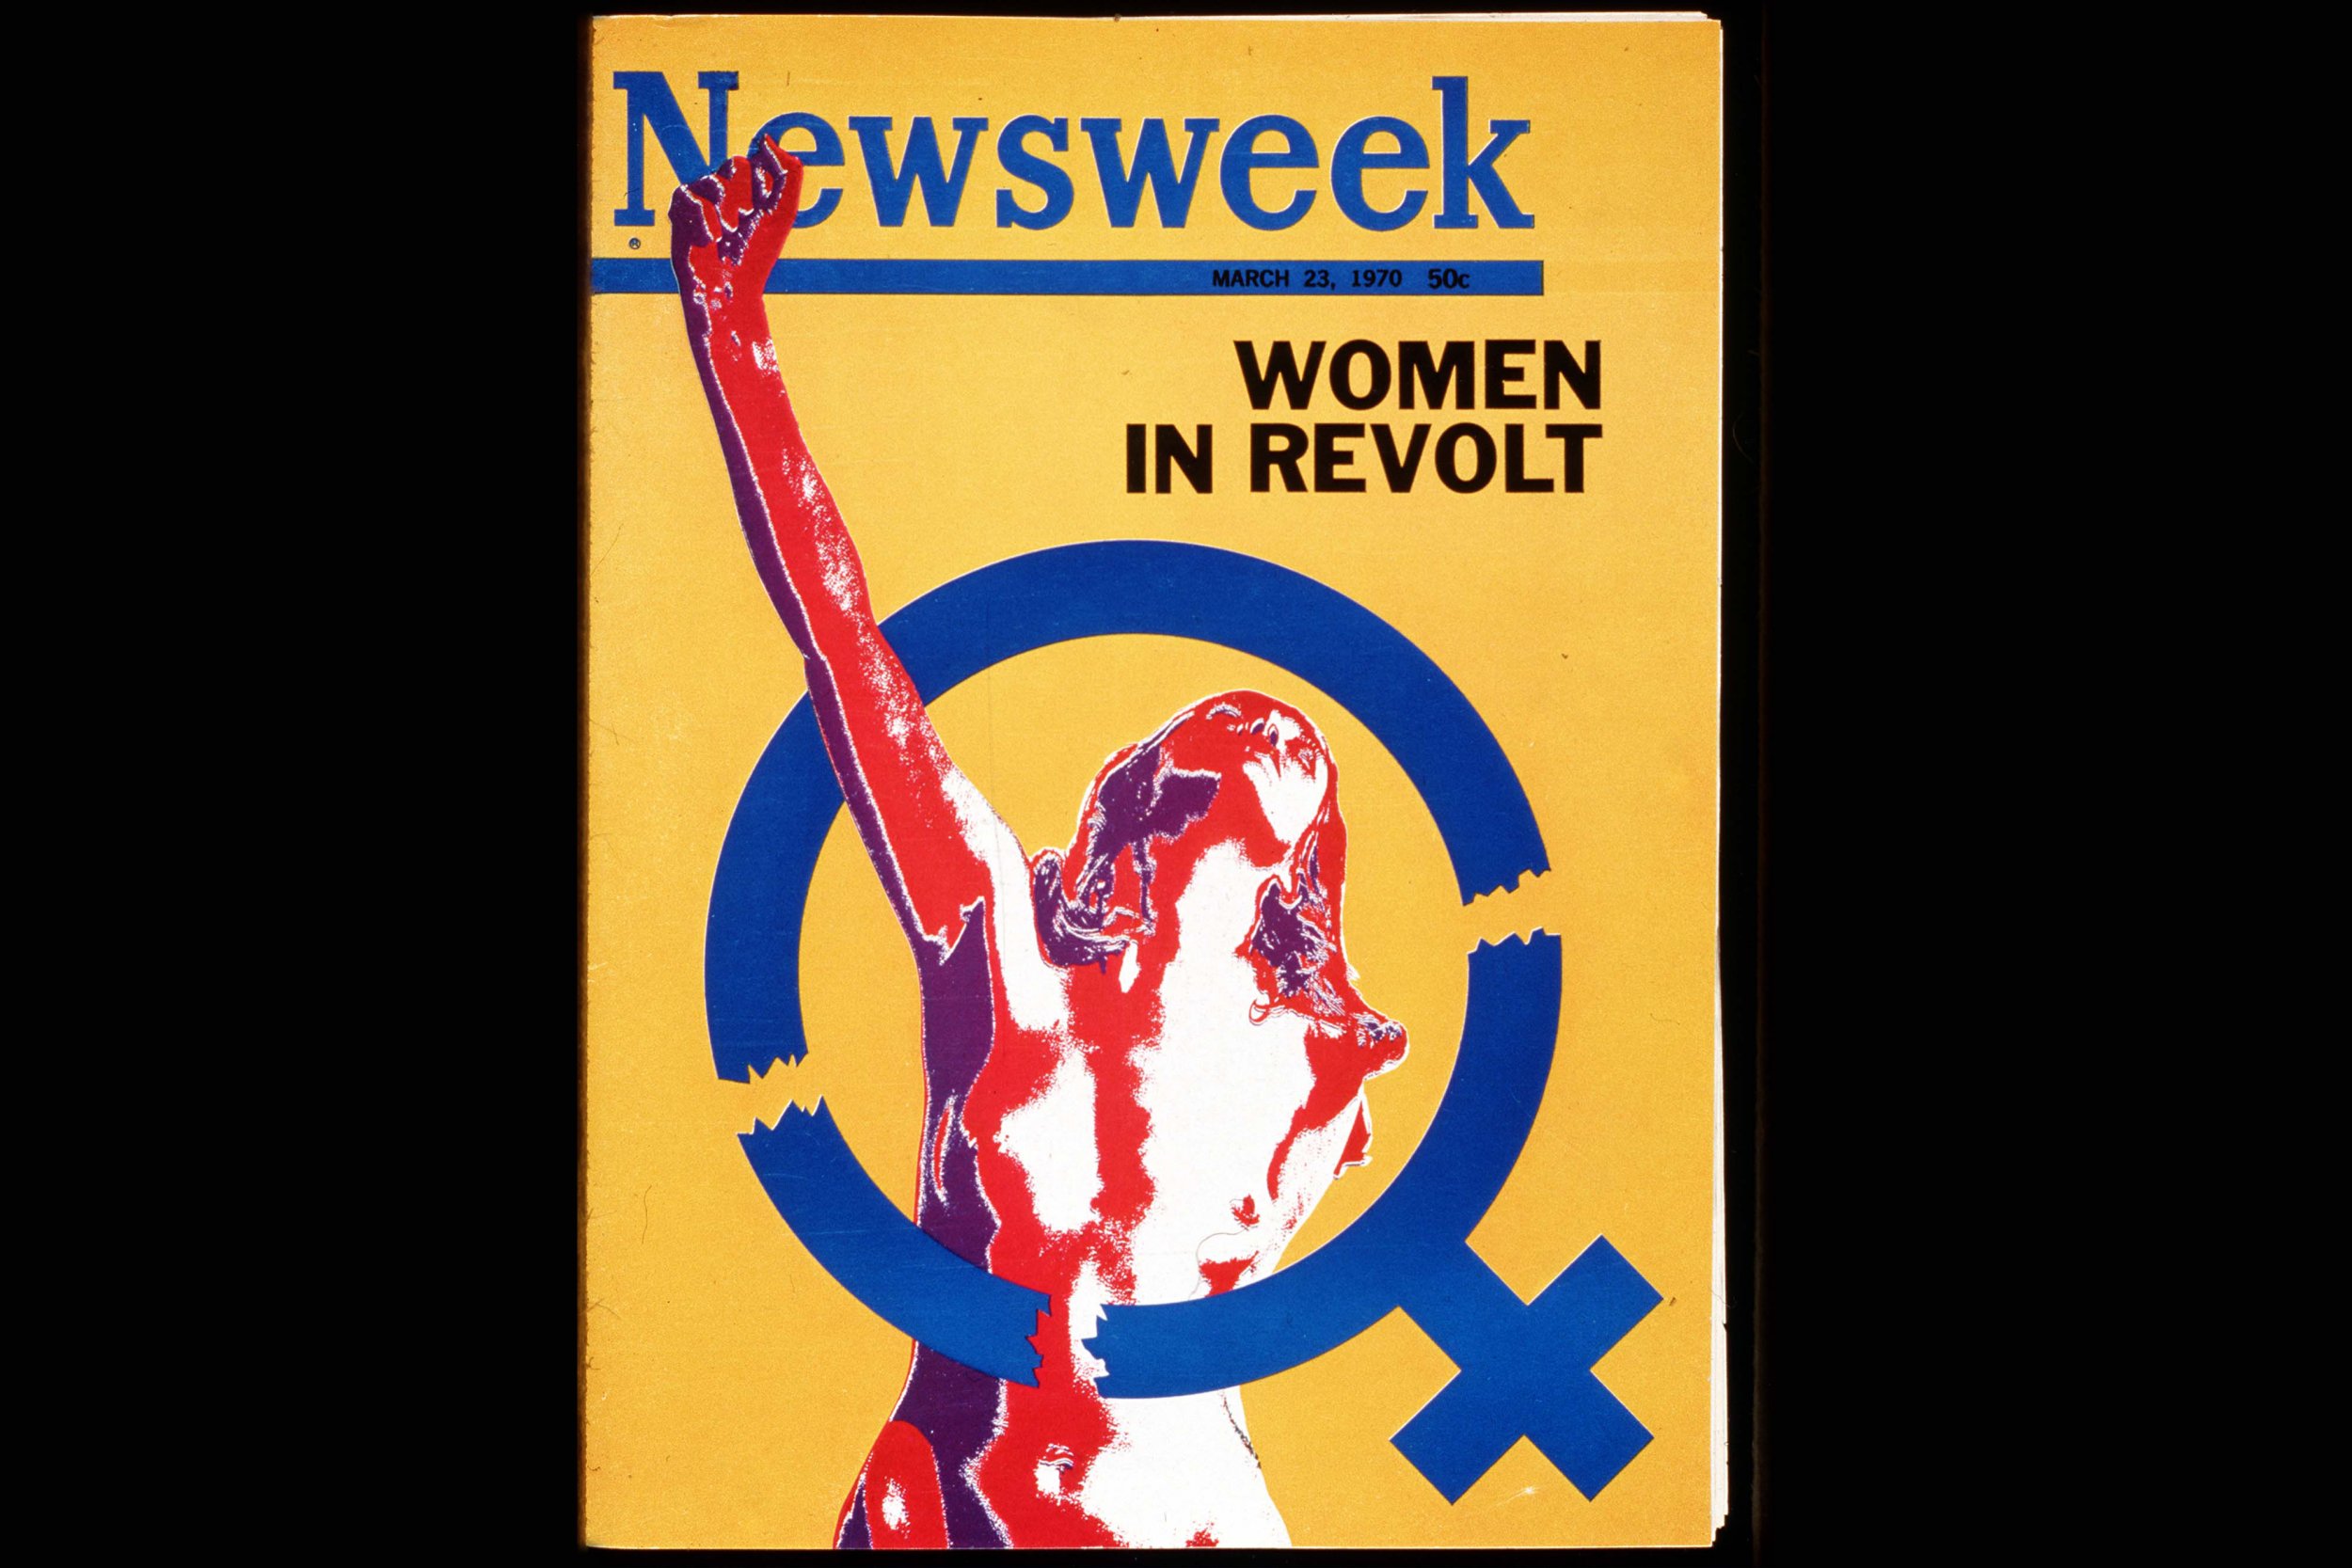 Women in Revolt A Newsweek Cover and Lawsuit Collide